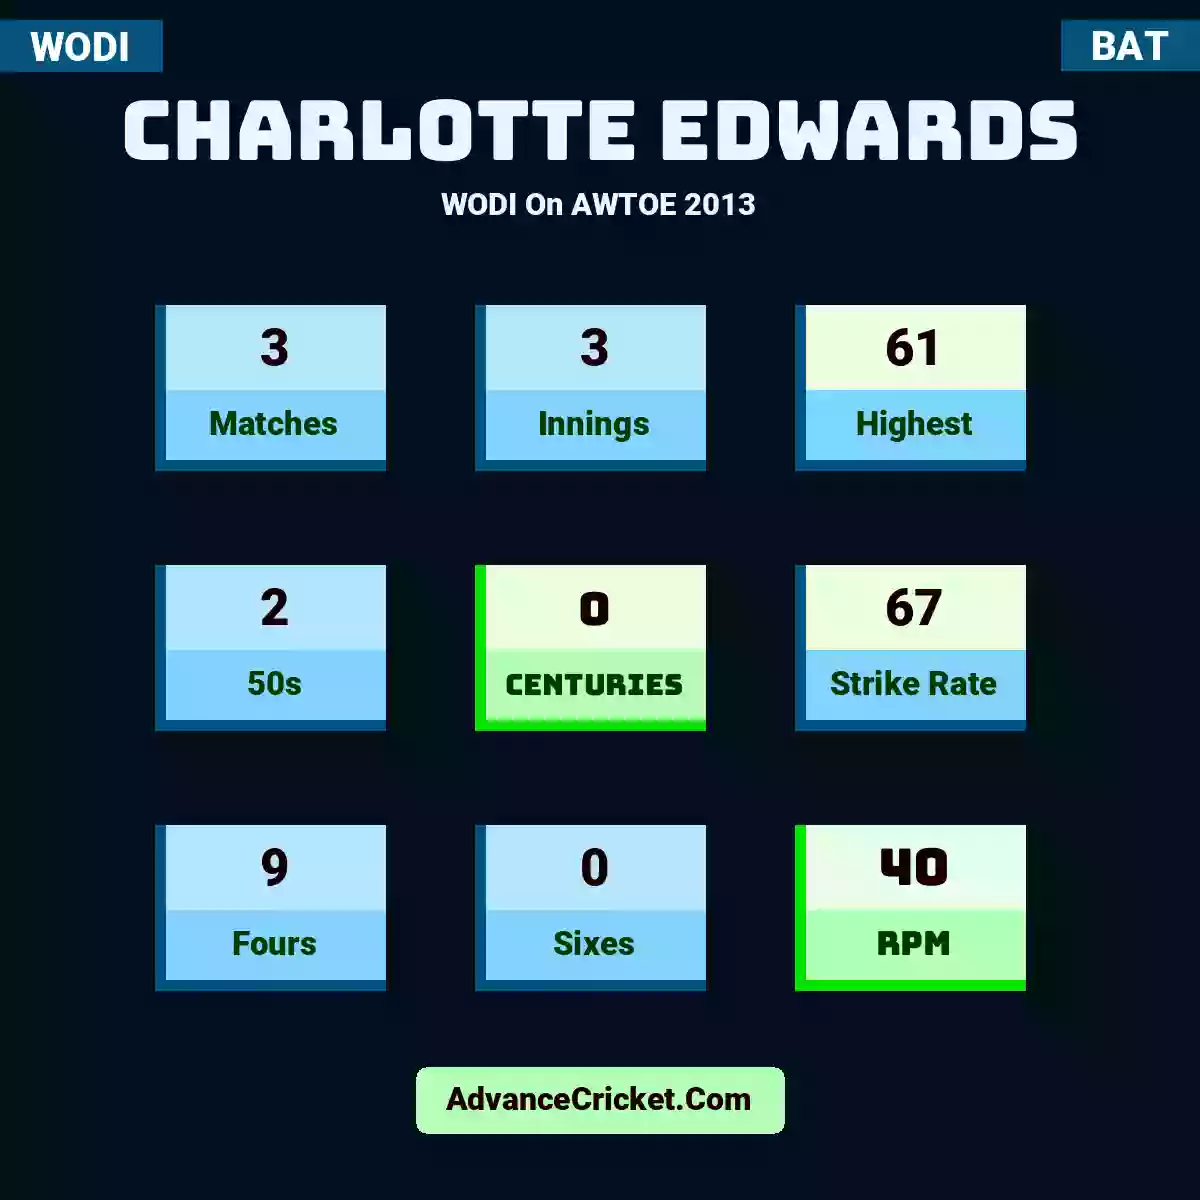 Charlotte Edwards WODI  On AWTOE 2013, Charlotte Edwards played 3 matches, scored 61 runs as highest, 2 half-centuries, and 0 centuries, with a strike rate of 67. C.Edwards hit 9 fours and 0 sixes, with an RPM of 40.